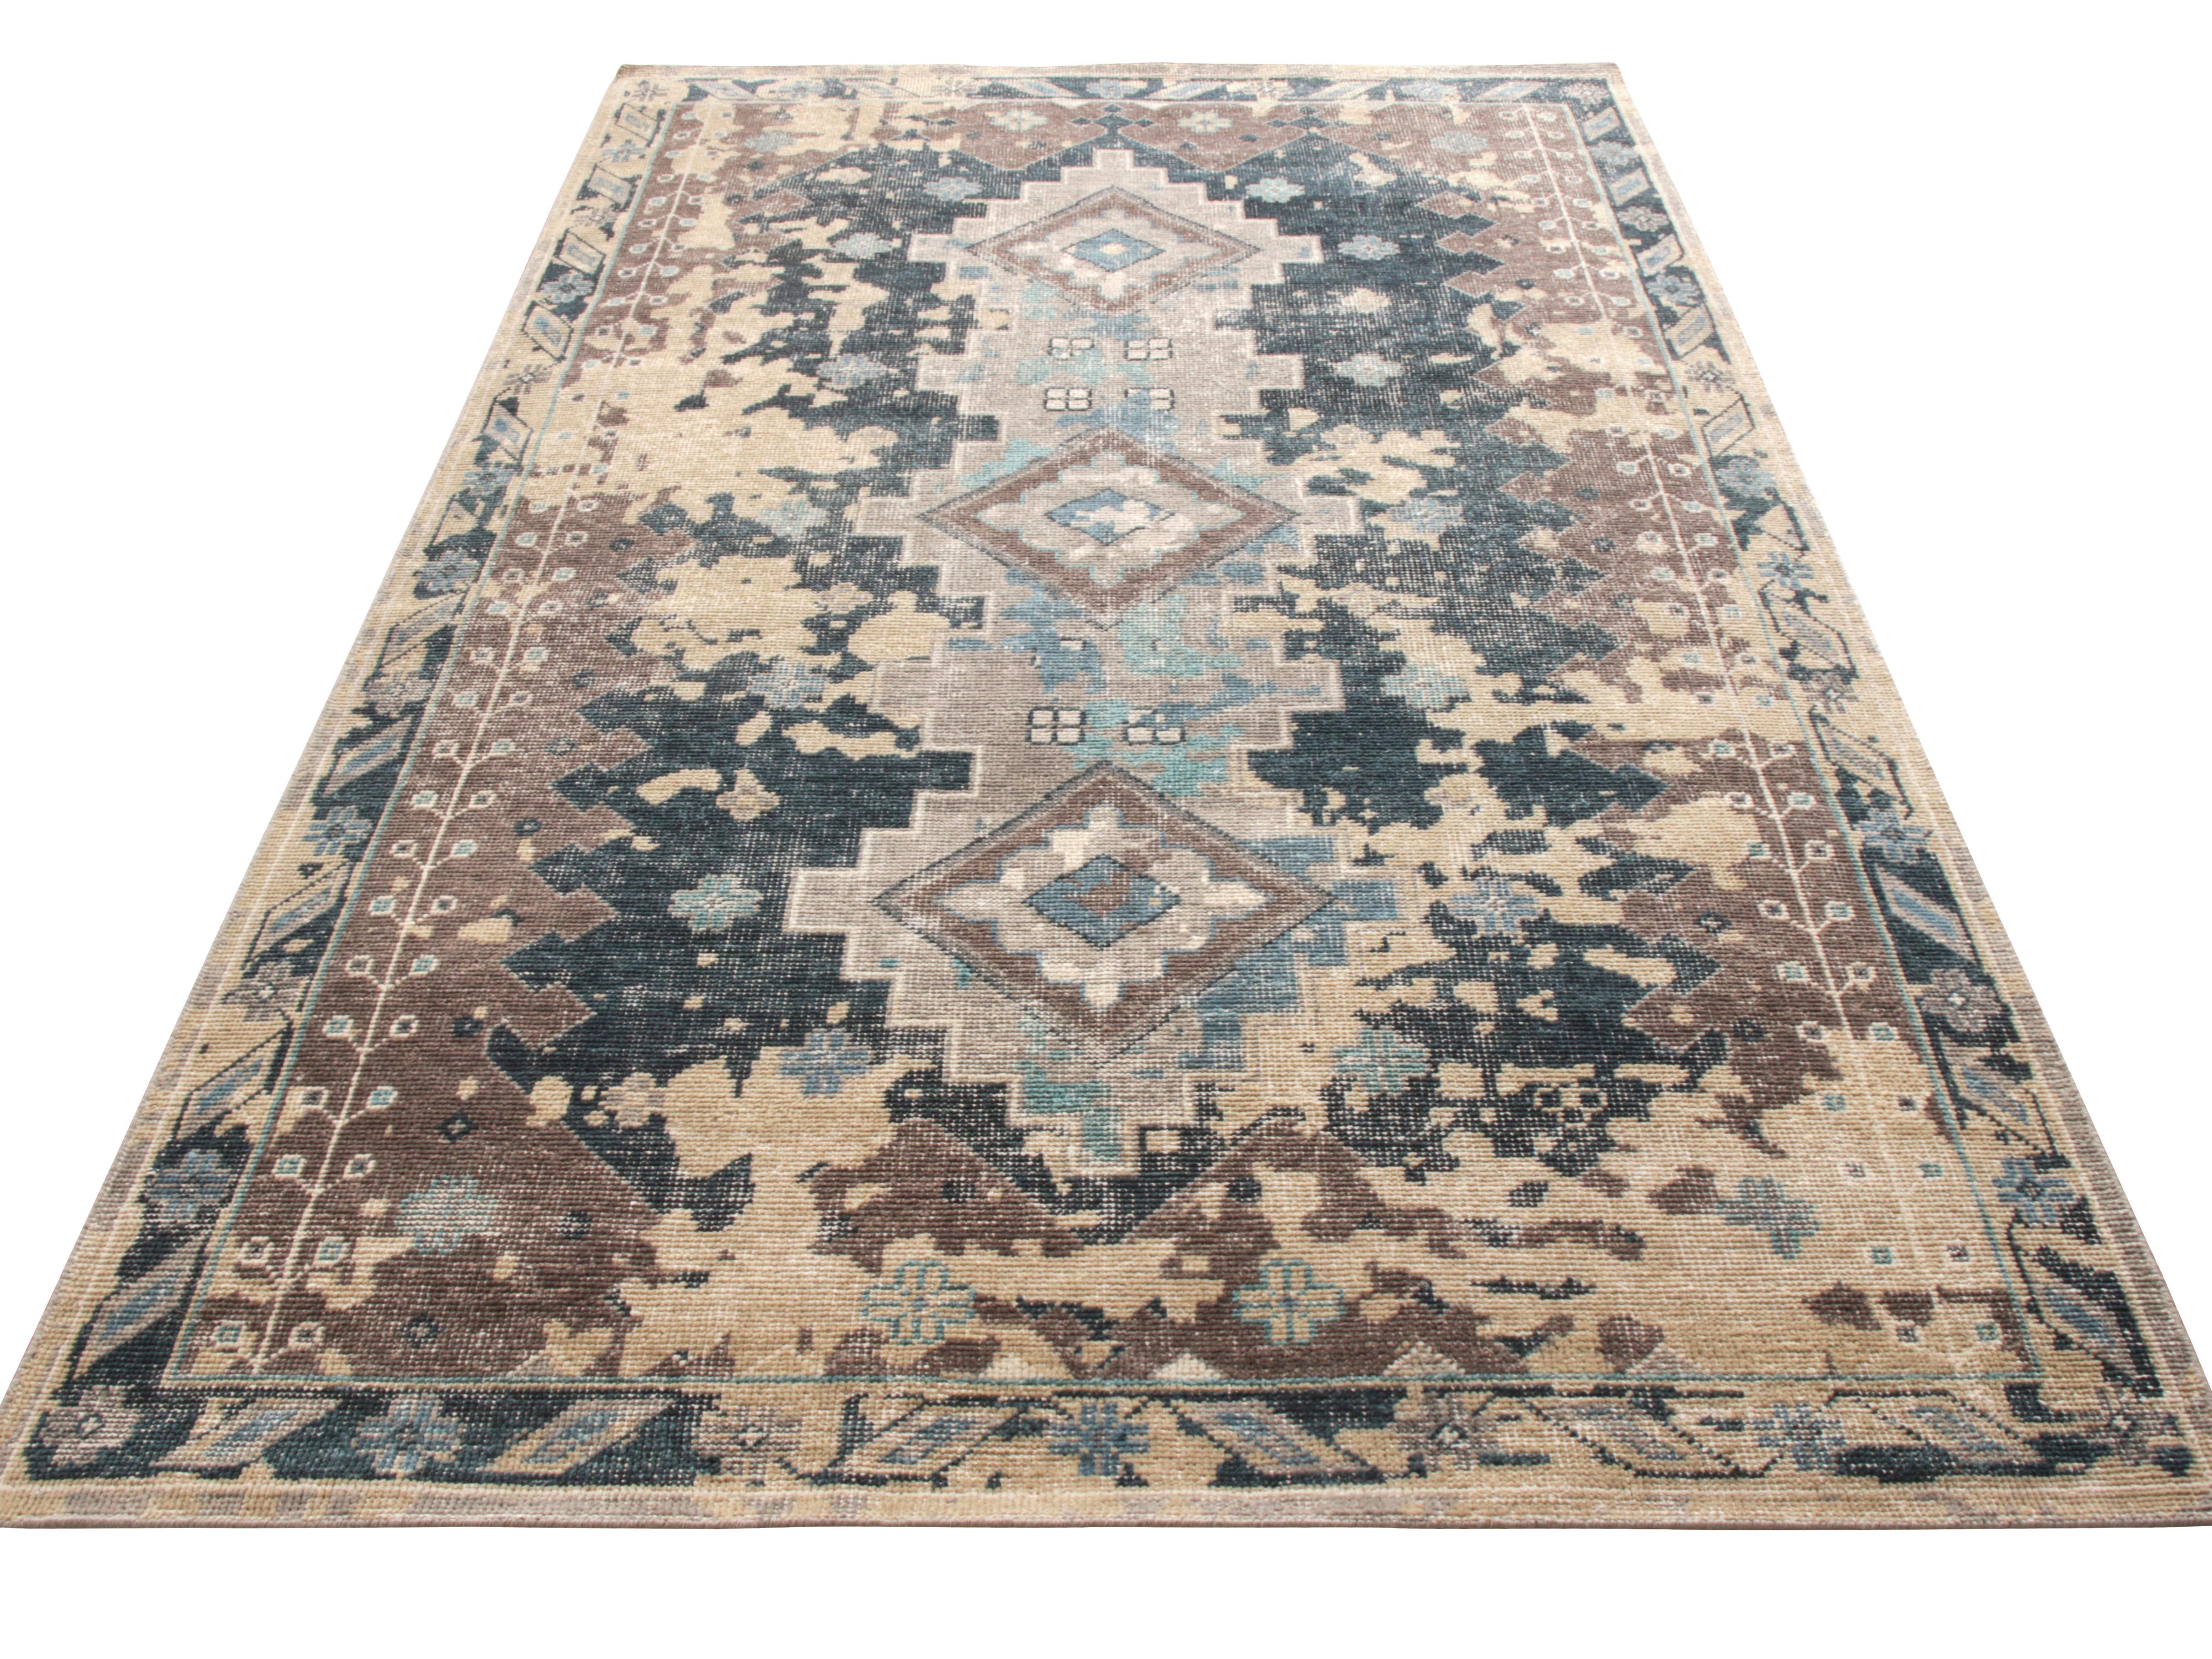 Hand knotted in wool, Rug & Kilim welcomes this 6x10 rug to the classically inspired selections in their Homage Collection. An ode to the mesmerising beauty of transitional patterns visualising a unique take in the tasteful distressed style